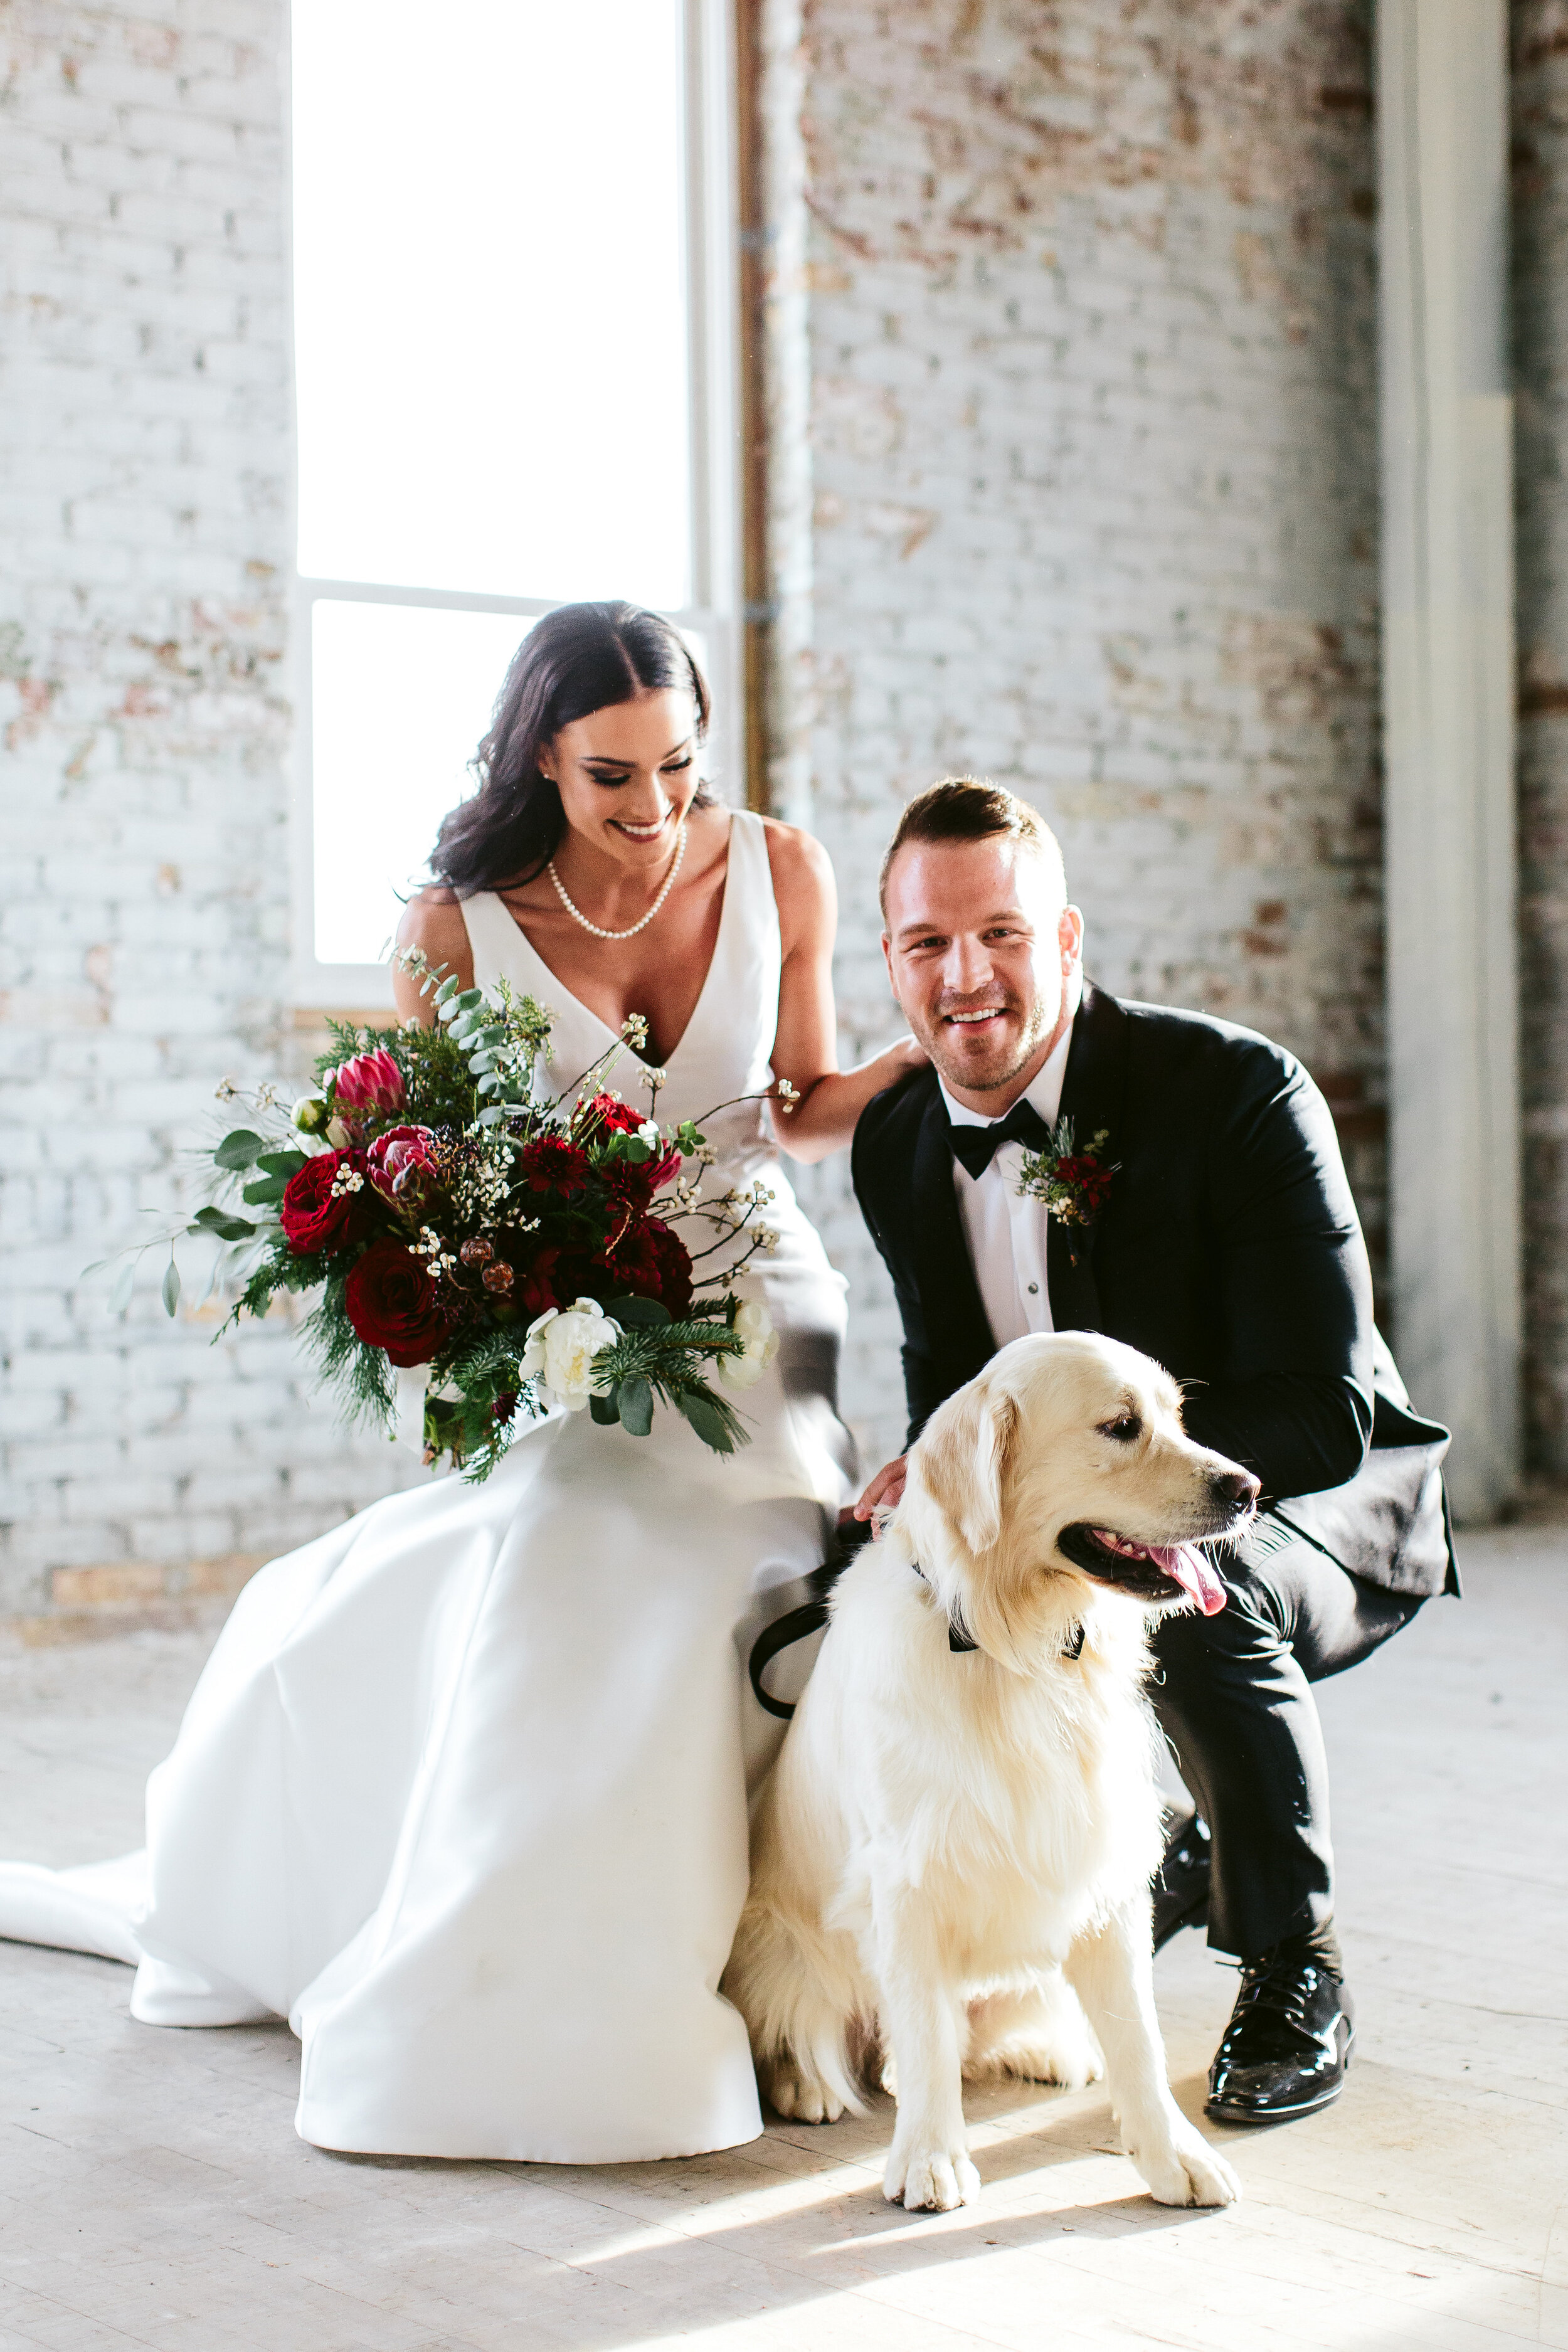 Luxury Winter Wonderland Wedding at Company 251 featured on CHI thee WED